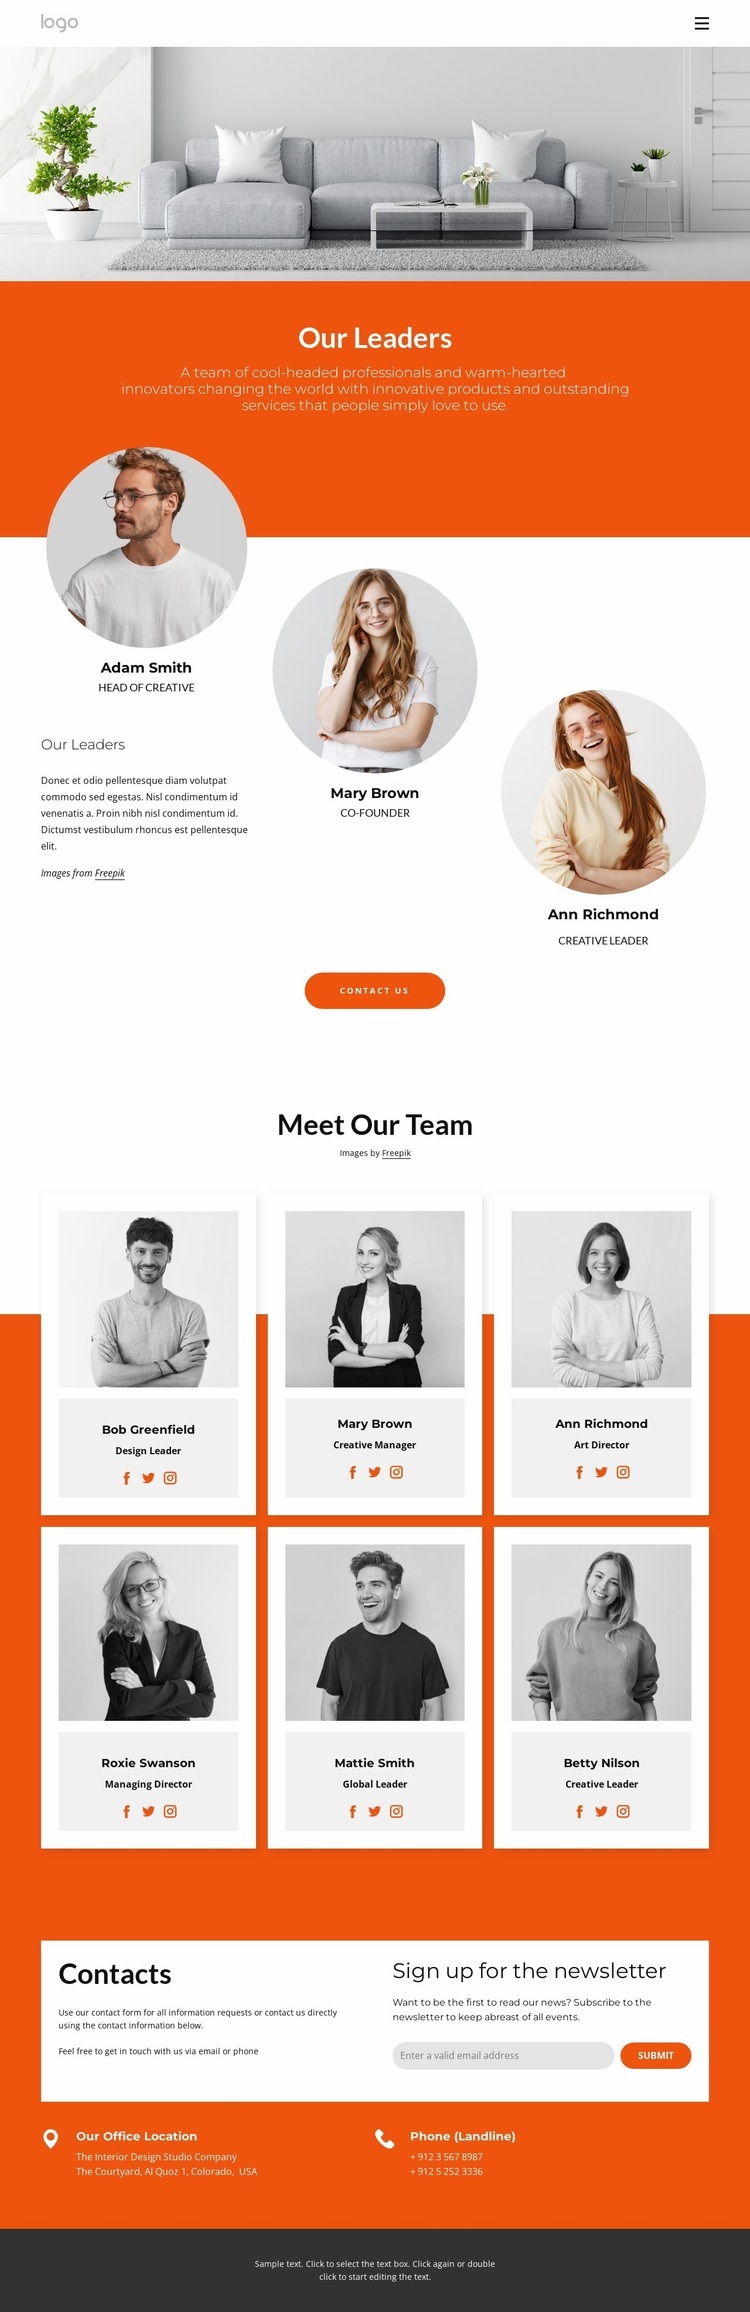 Our great team Web Page Design